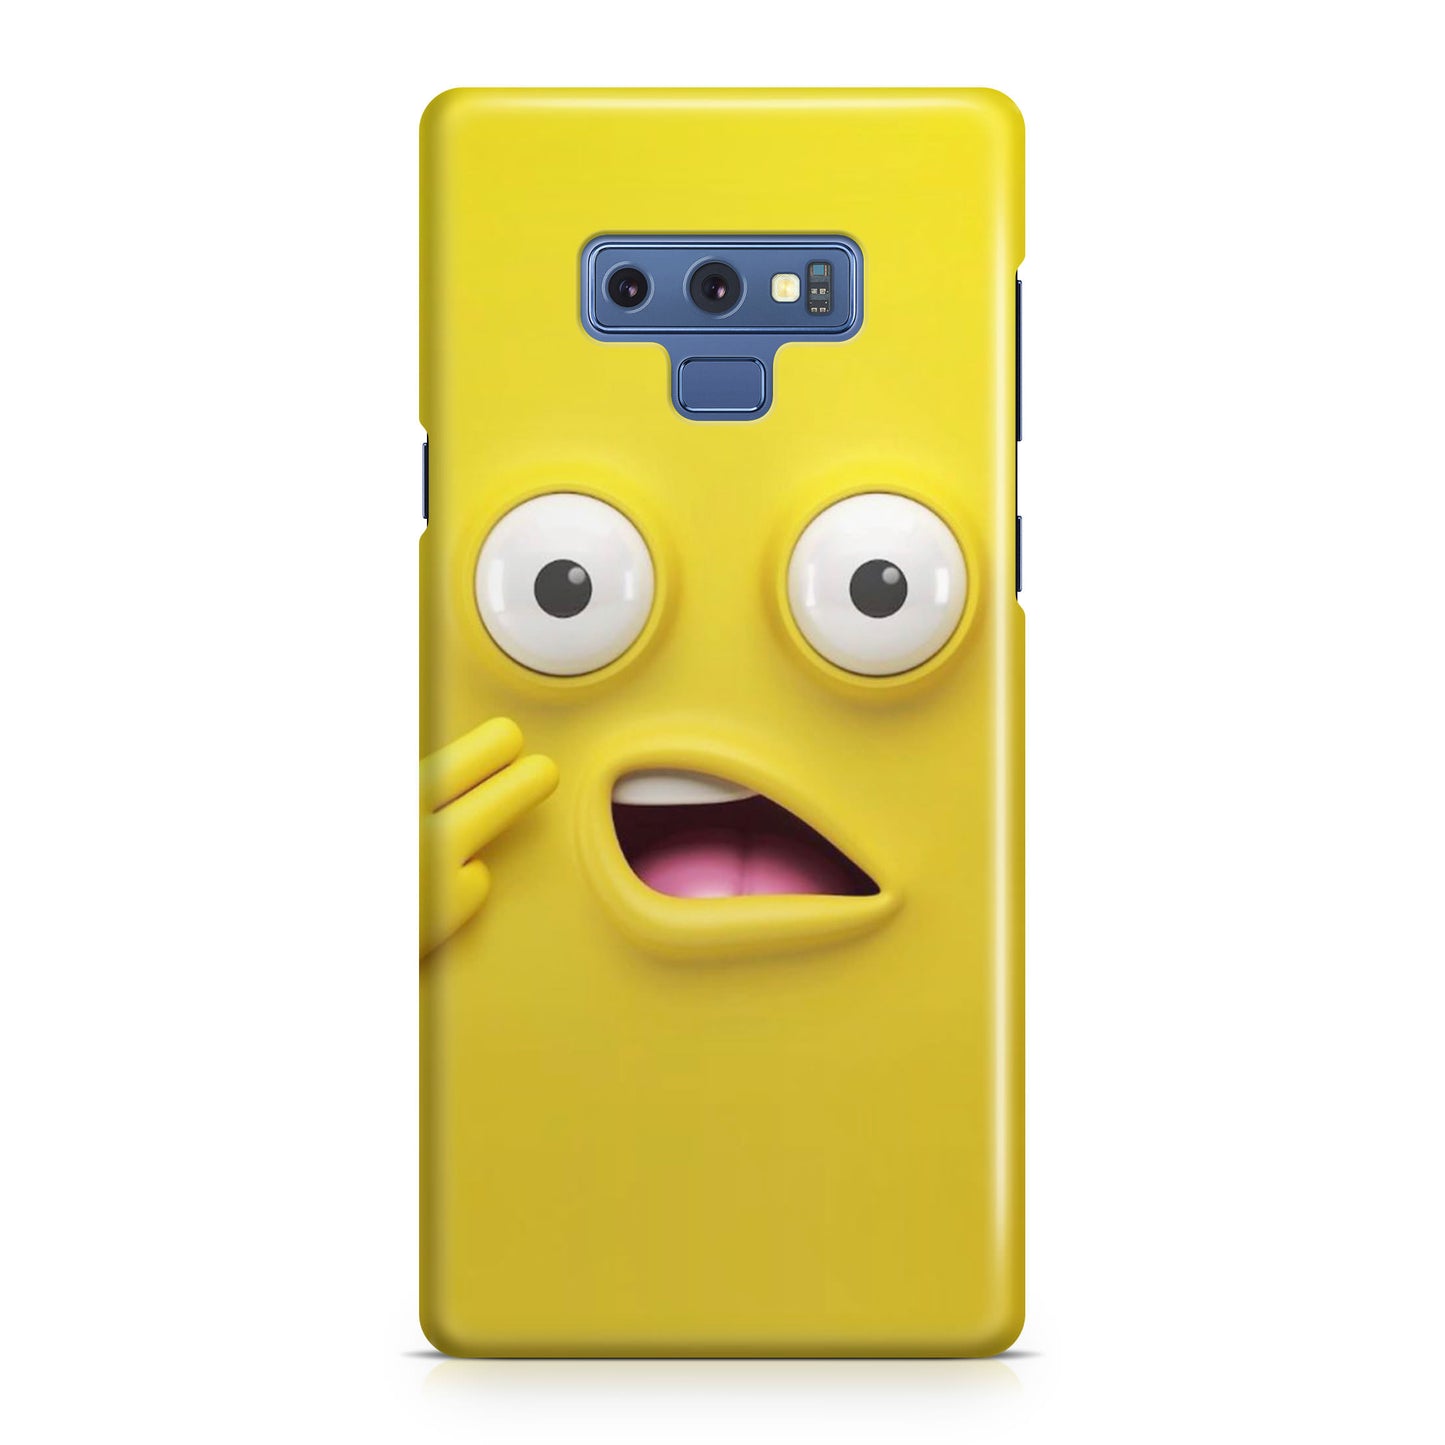 Shocked Pose Galaxy Note 9 Case